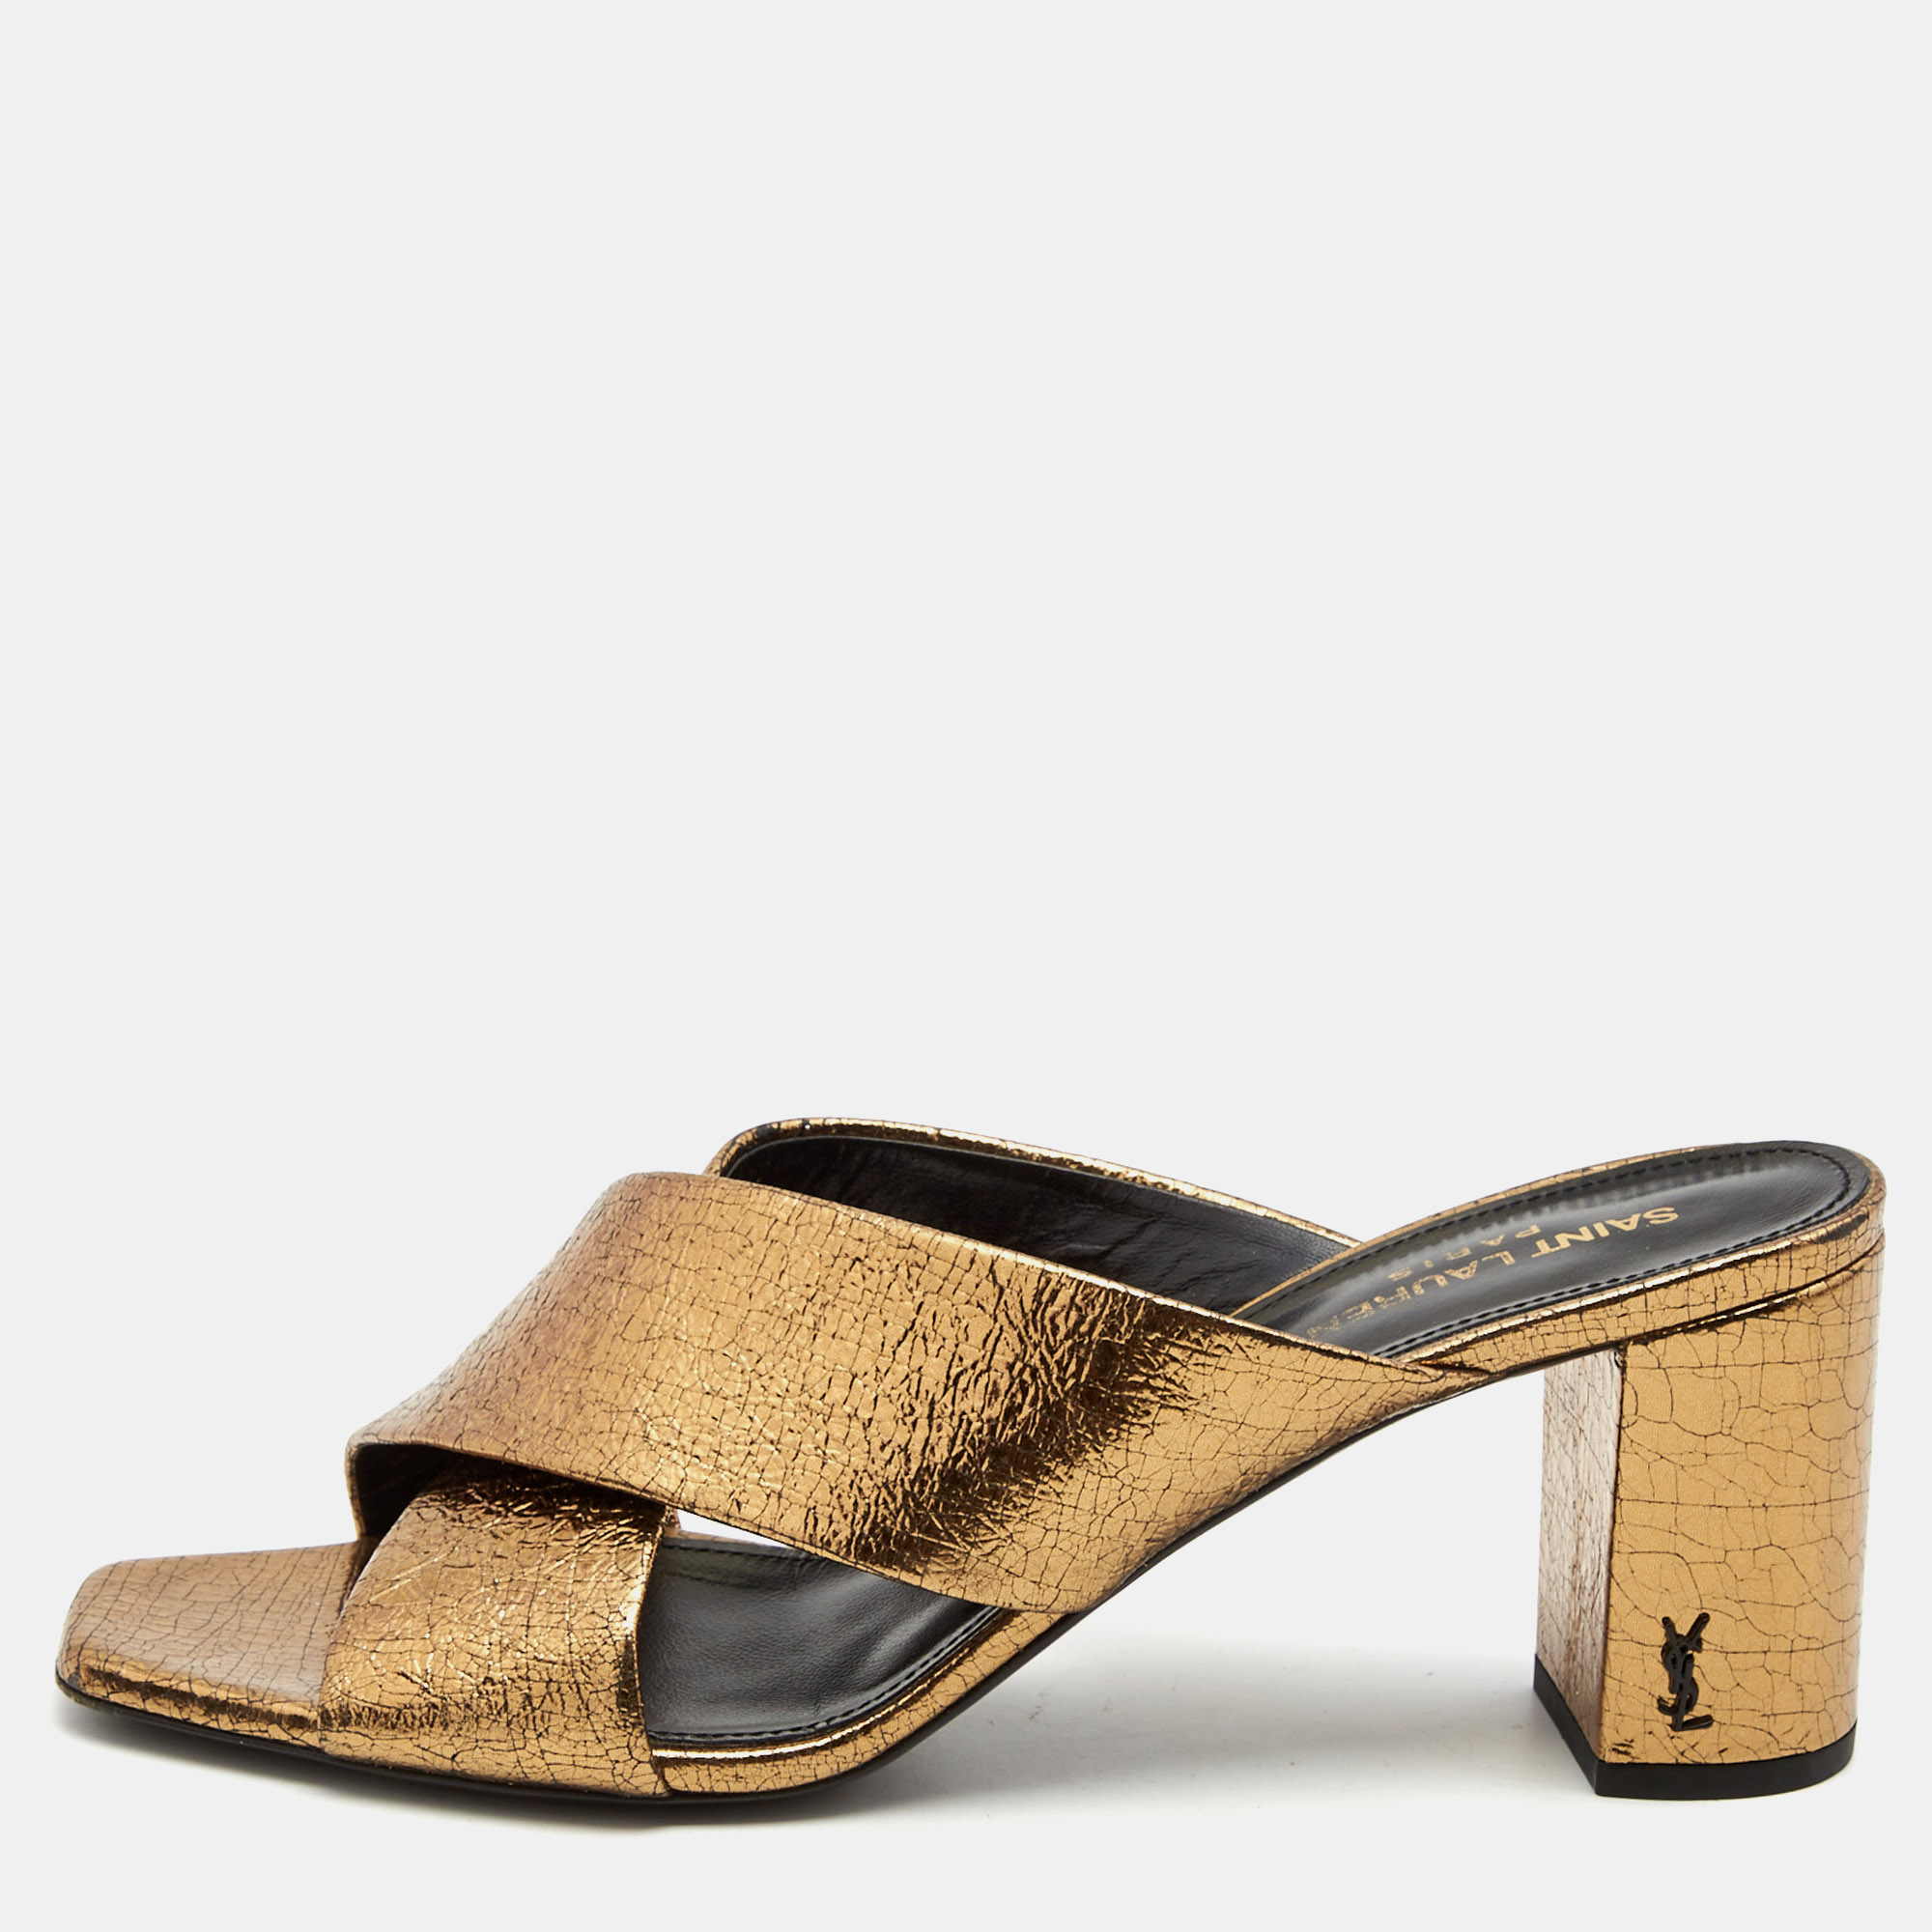 Pre-owned Saint Laurent Metallic Textured Leather Loulou Slide Sandals Size 39.5